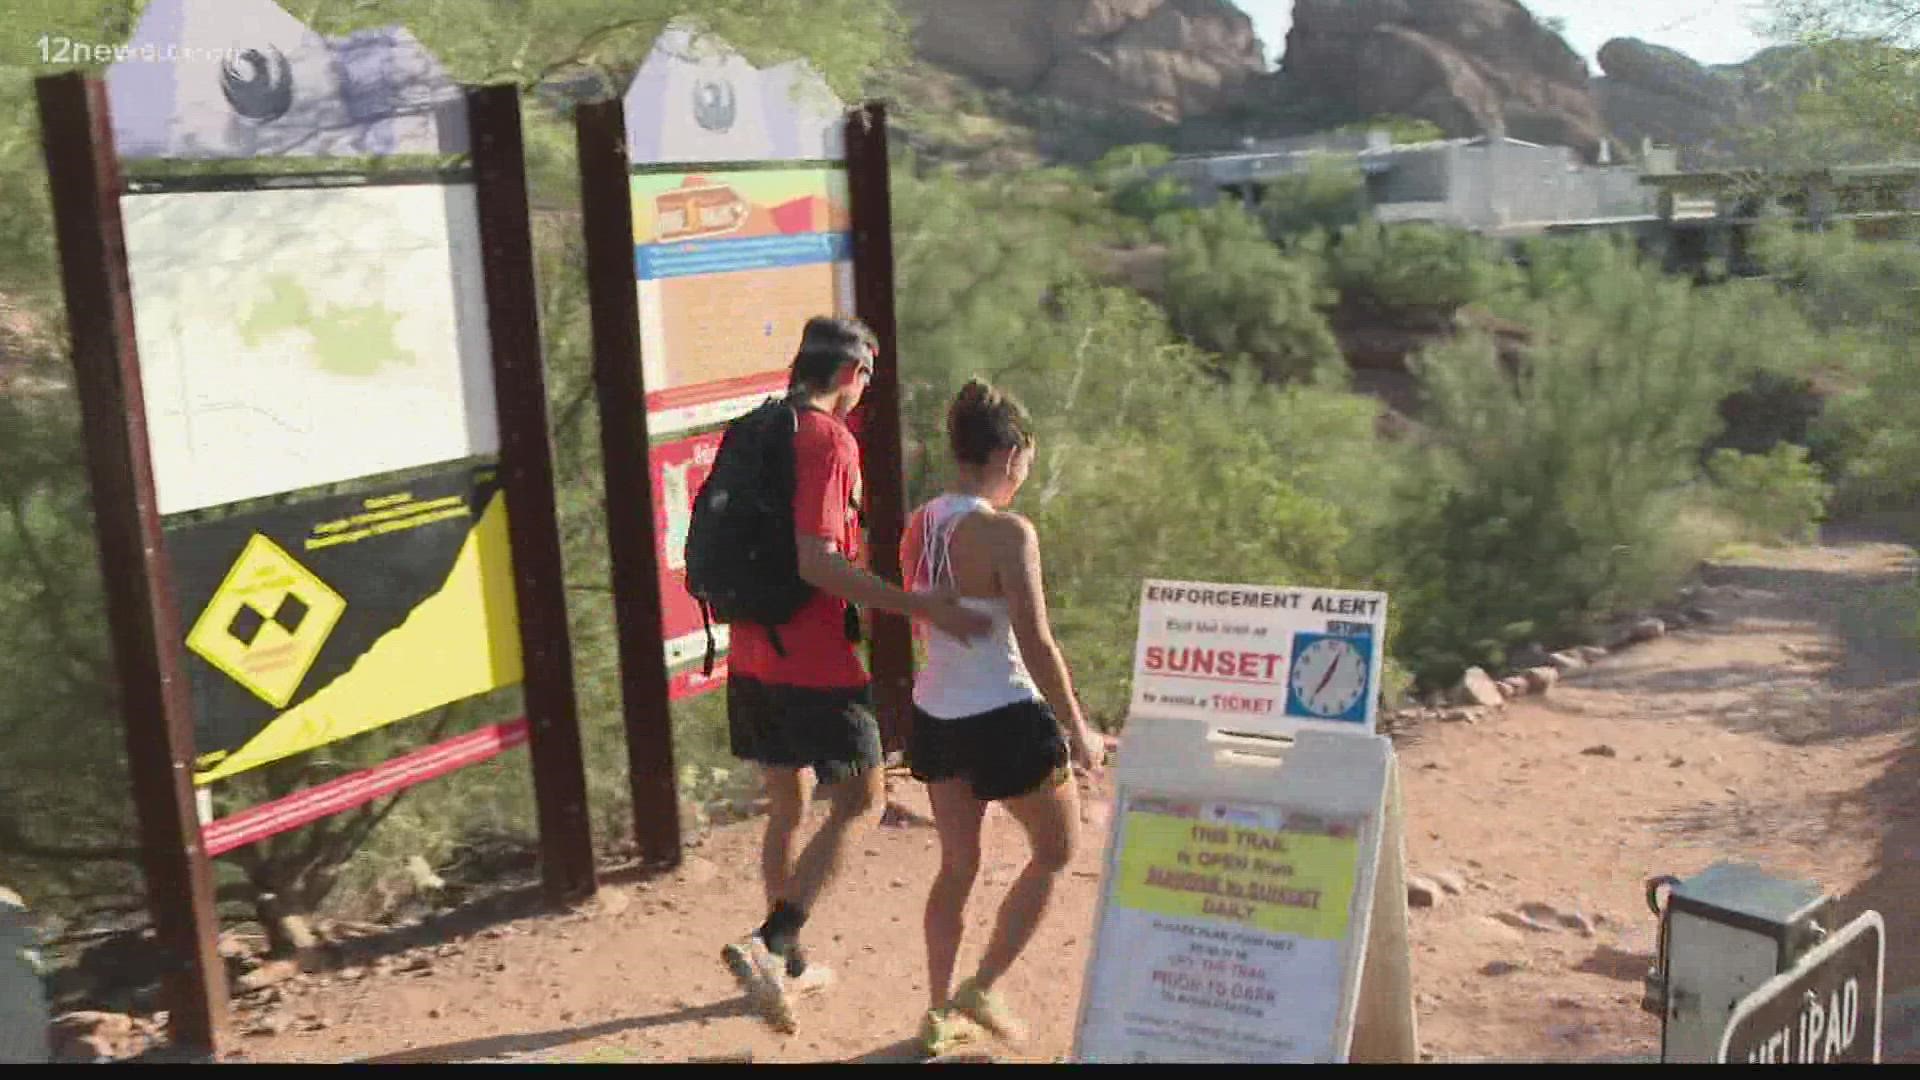 From flash flooding to high heat here in the Valley, Phoenix is trying to make sure hikers stay safe while we deal with excessive heat warnings.